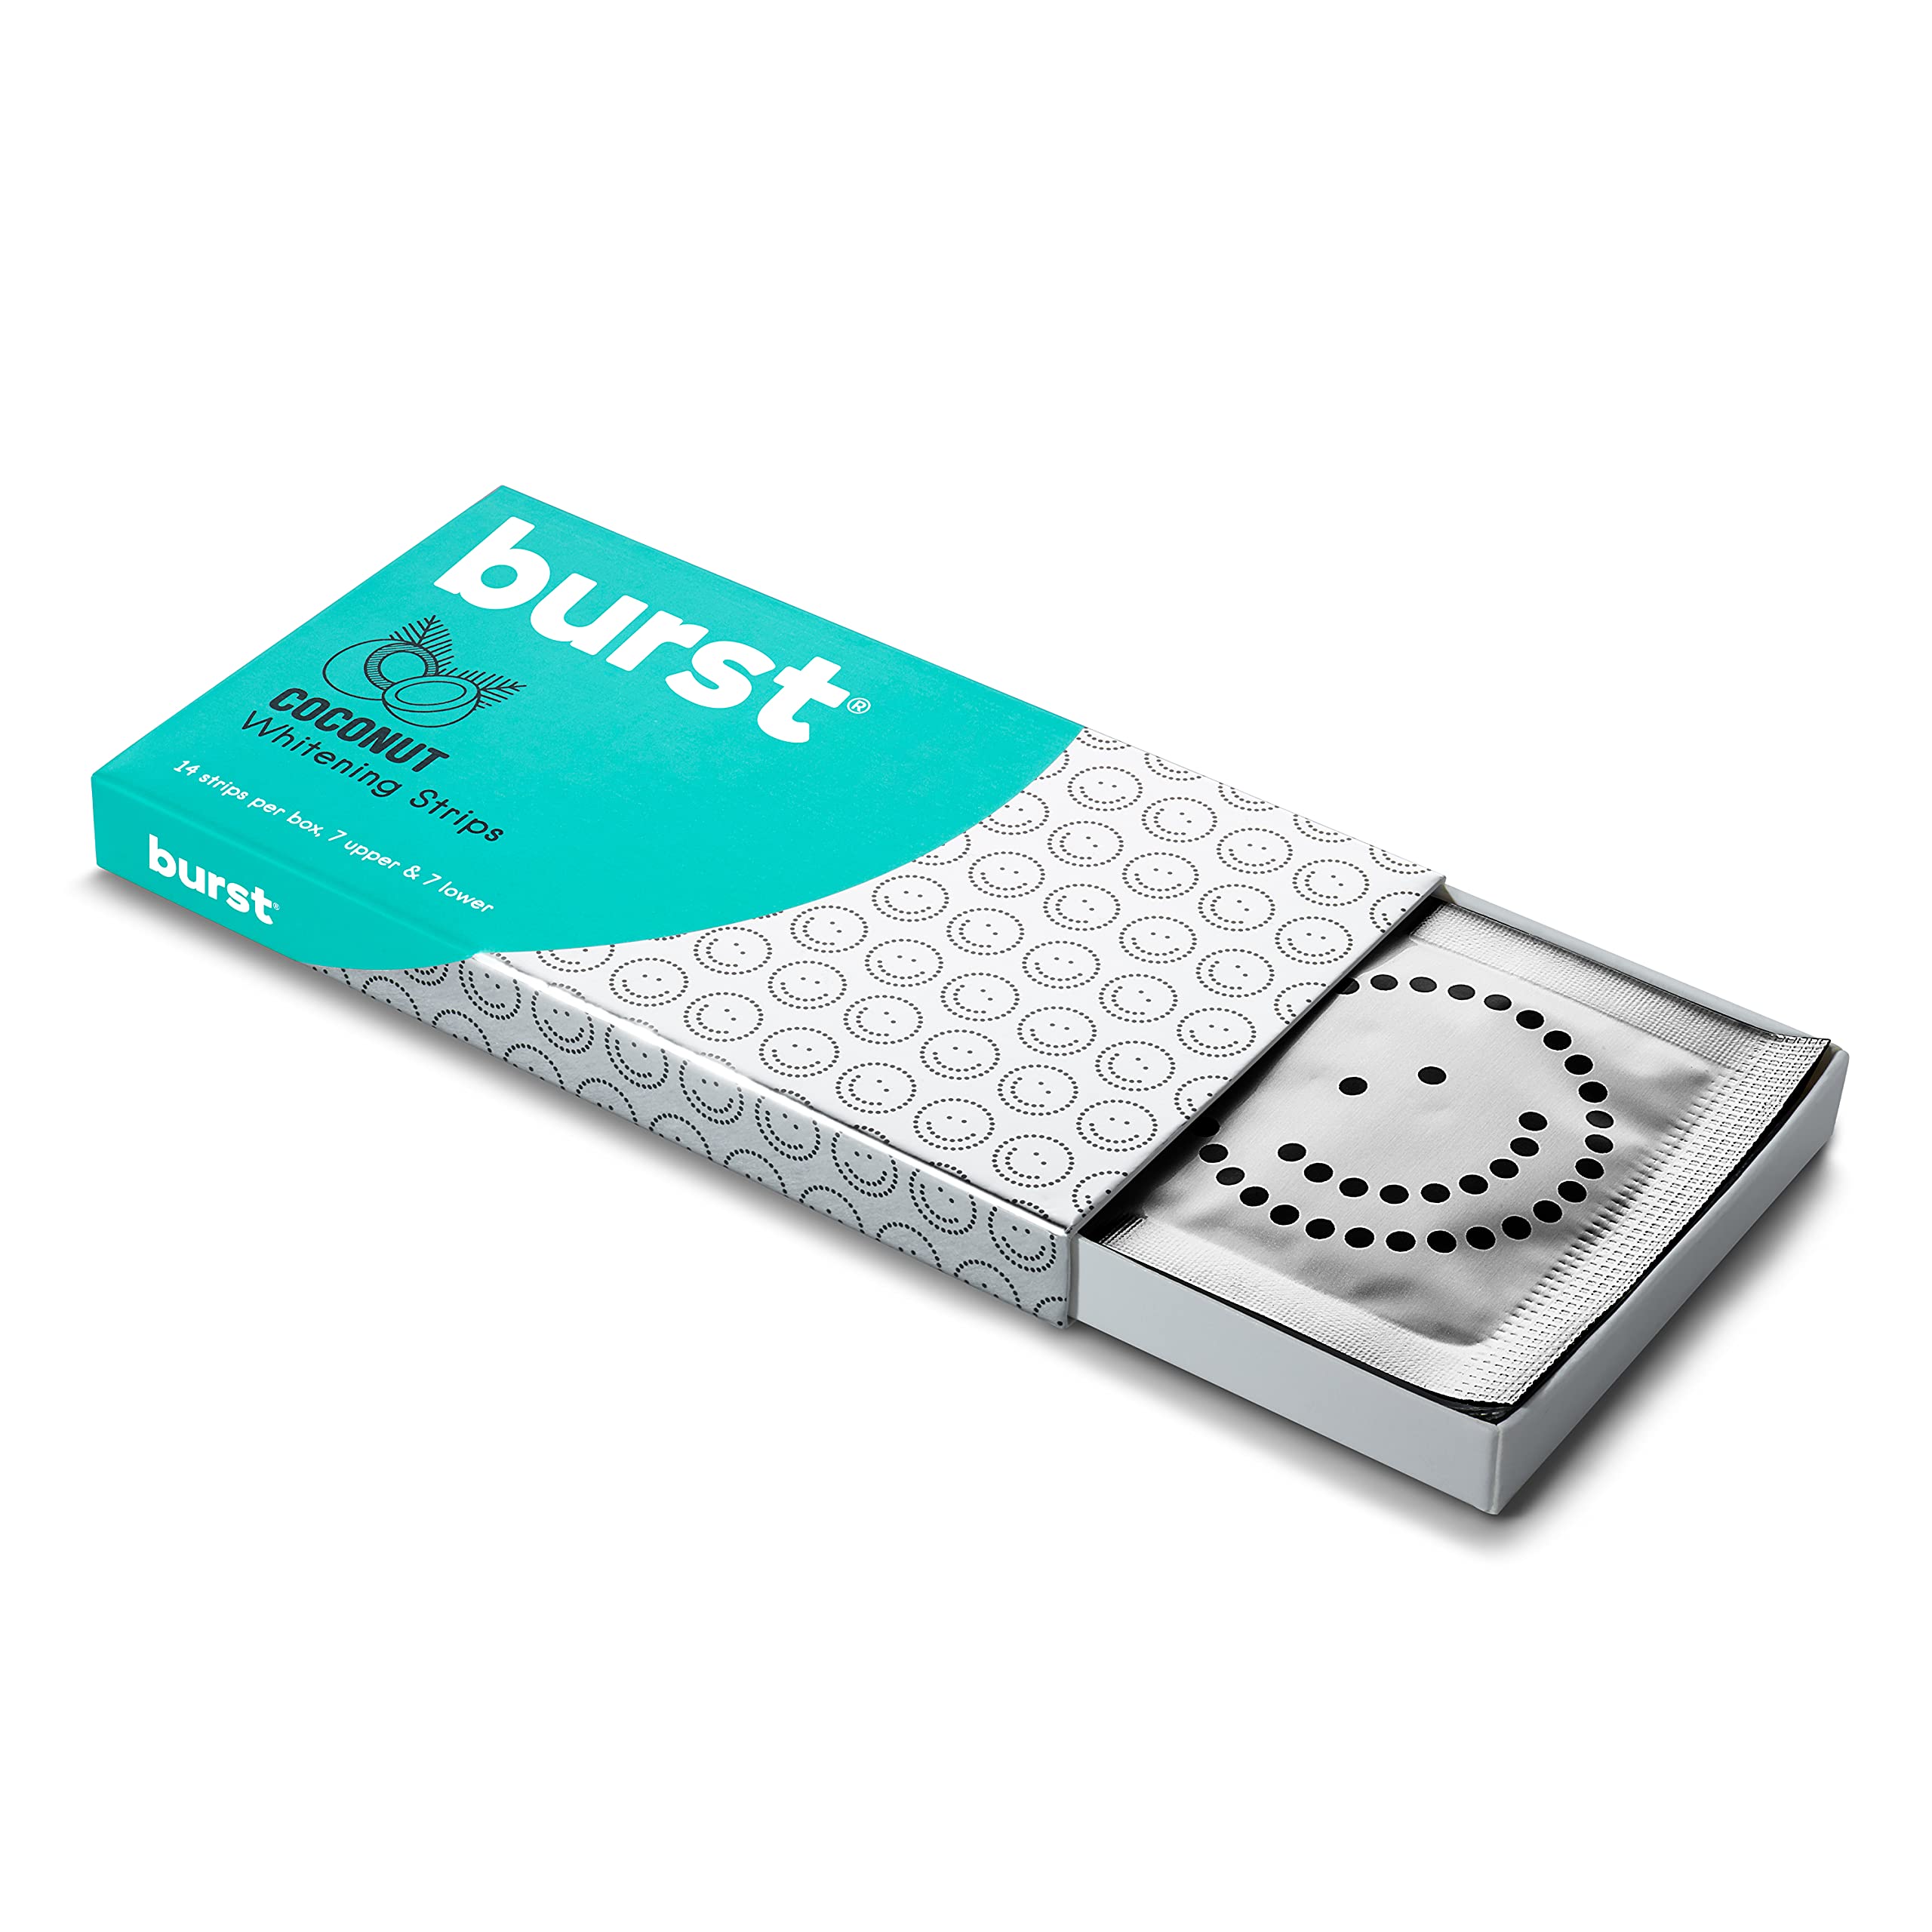  BURST Teeth Whitening Strip Kit - Sensitive Teeth Friendly - 10  Treatments with No-Slip Grip - White Strips Whiten with Visible Results in  Just 15 Minutes - Mint + Coconut Whitening Strips : Health & Household